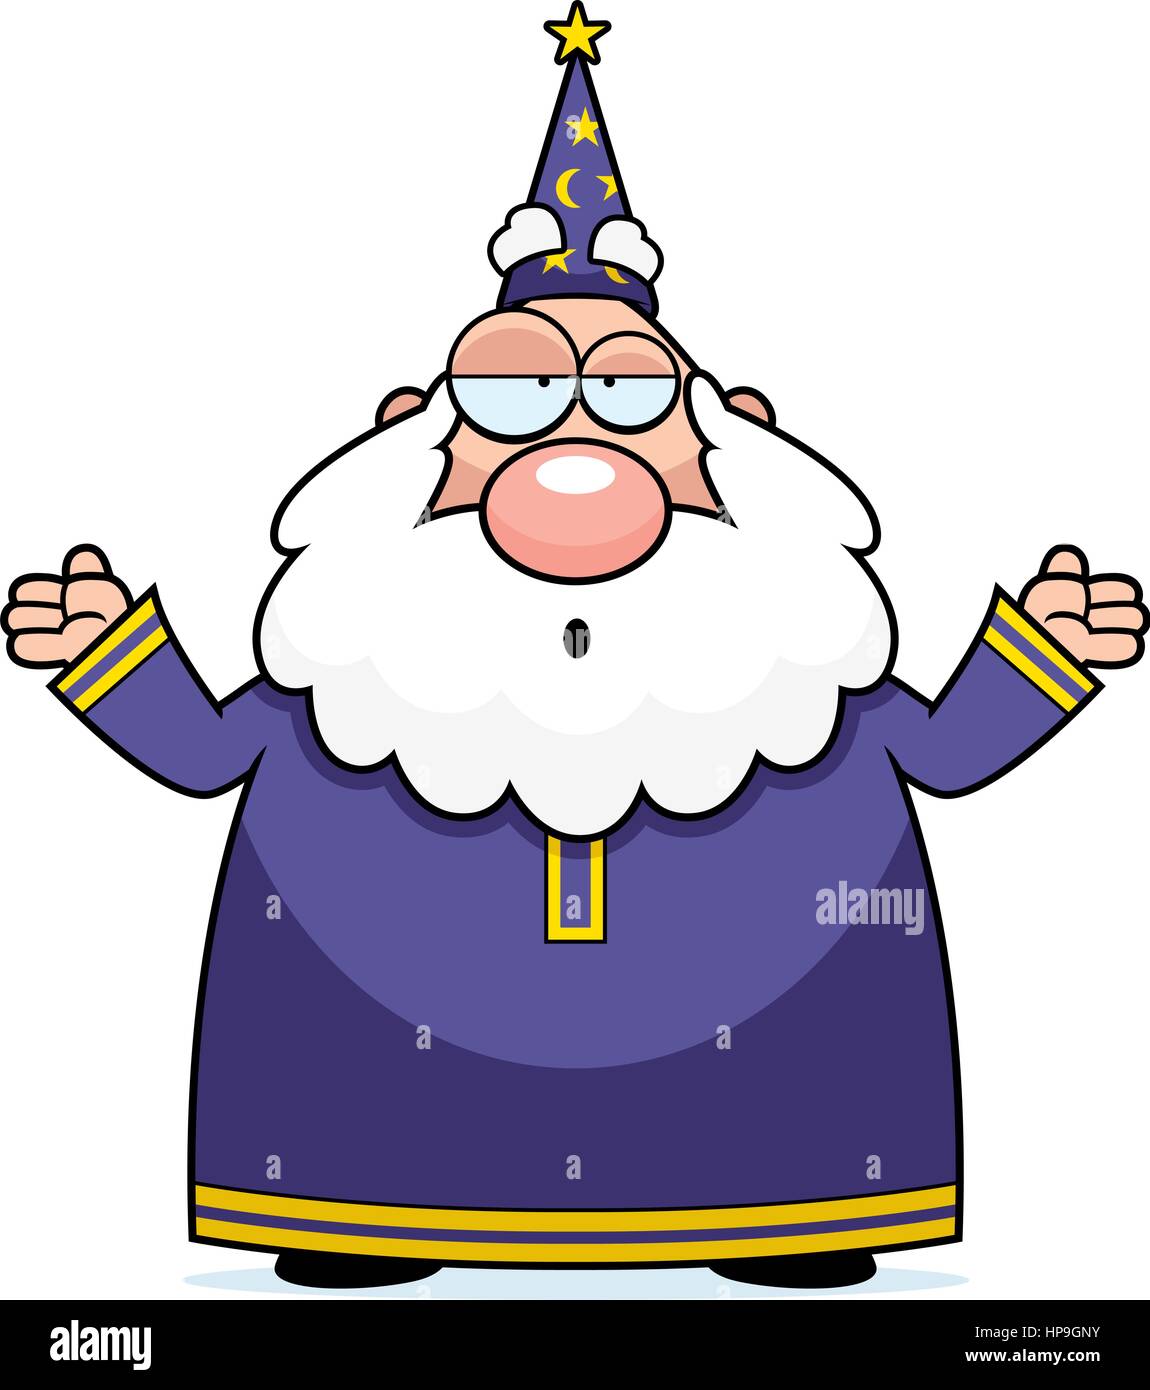 A cartoon wizard with an confused expression. Stock Vector